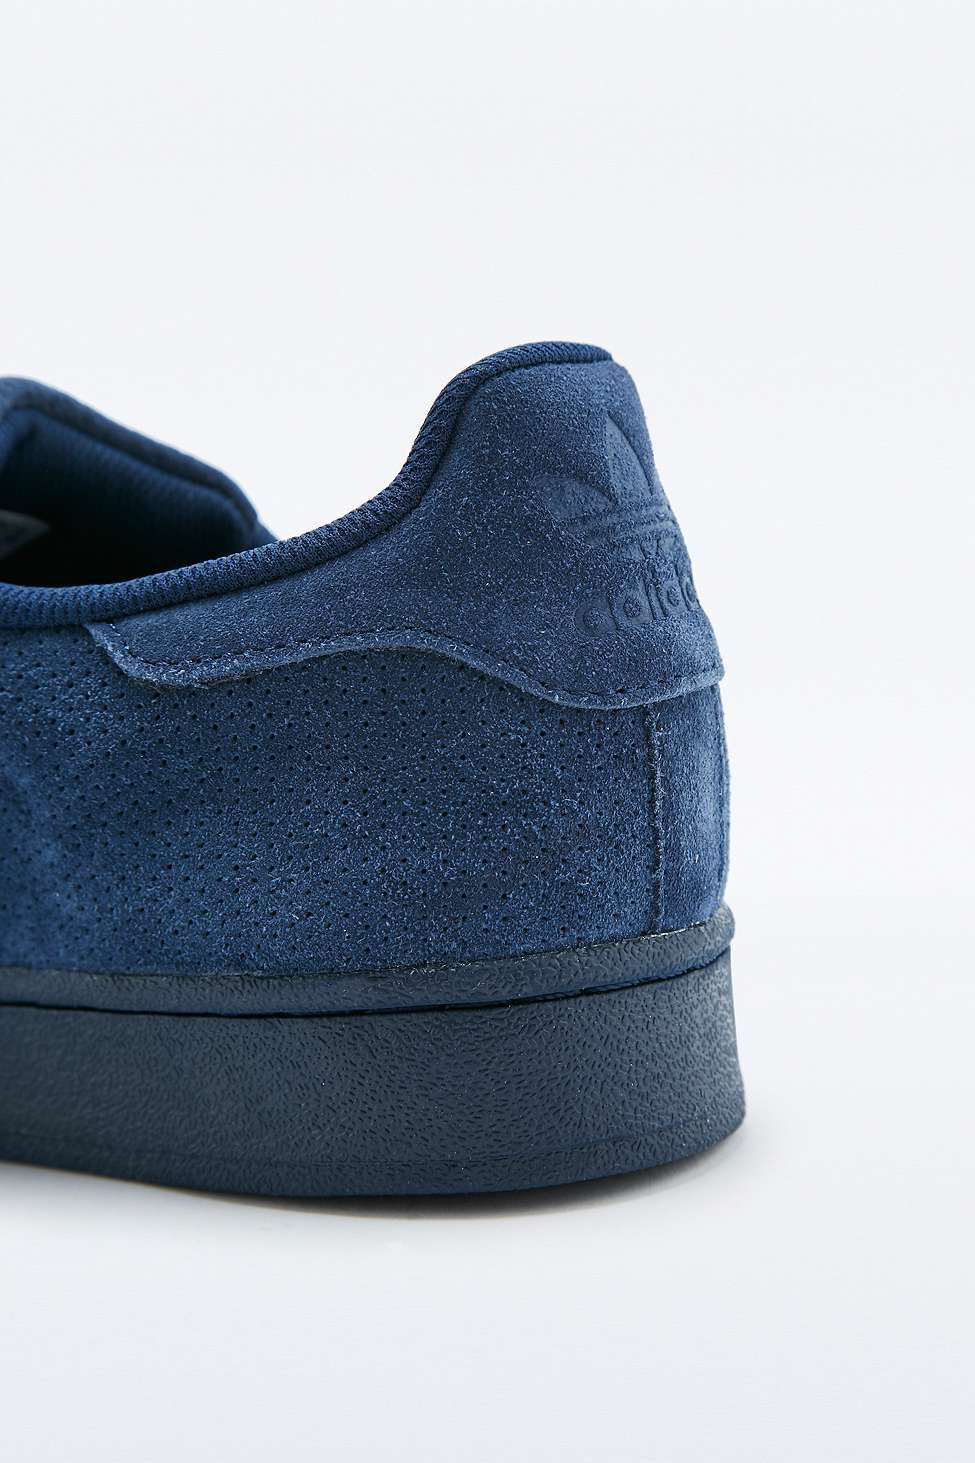 adidas blue suede trainers - | Tribe Space